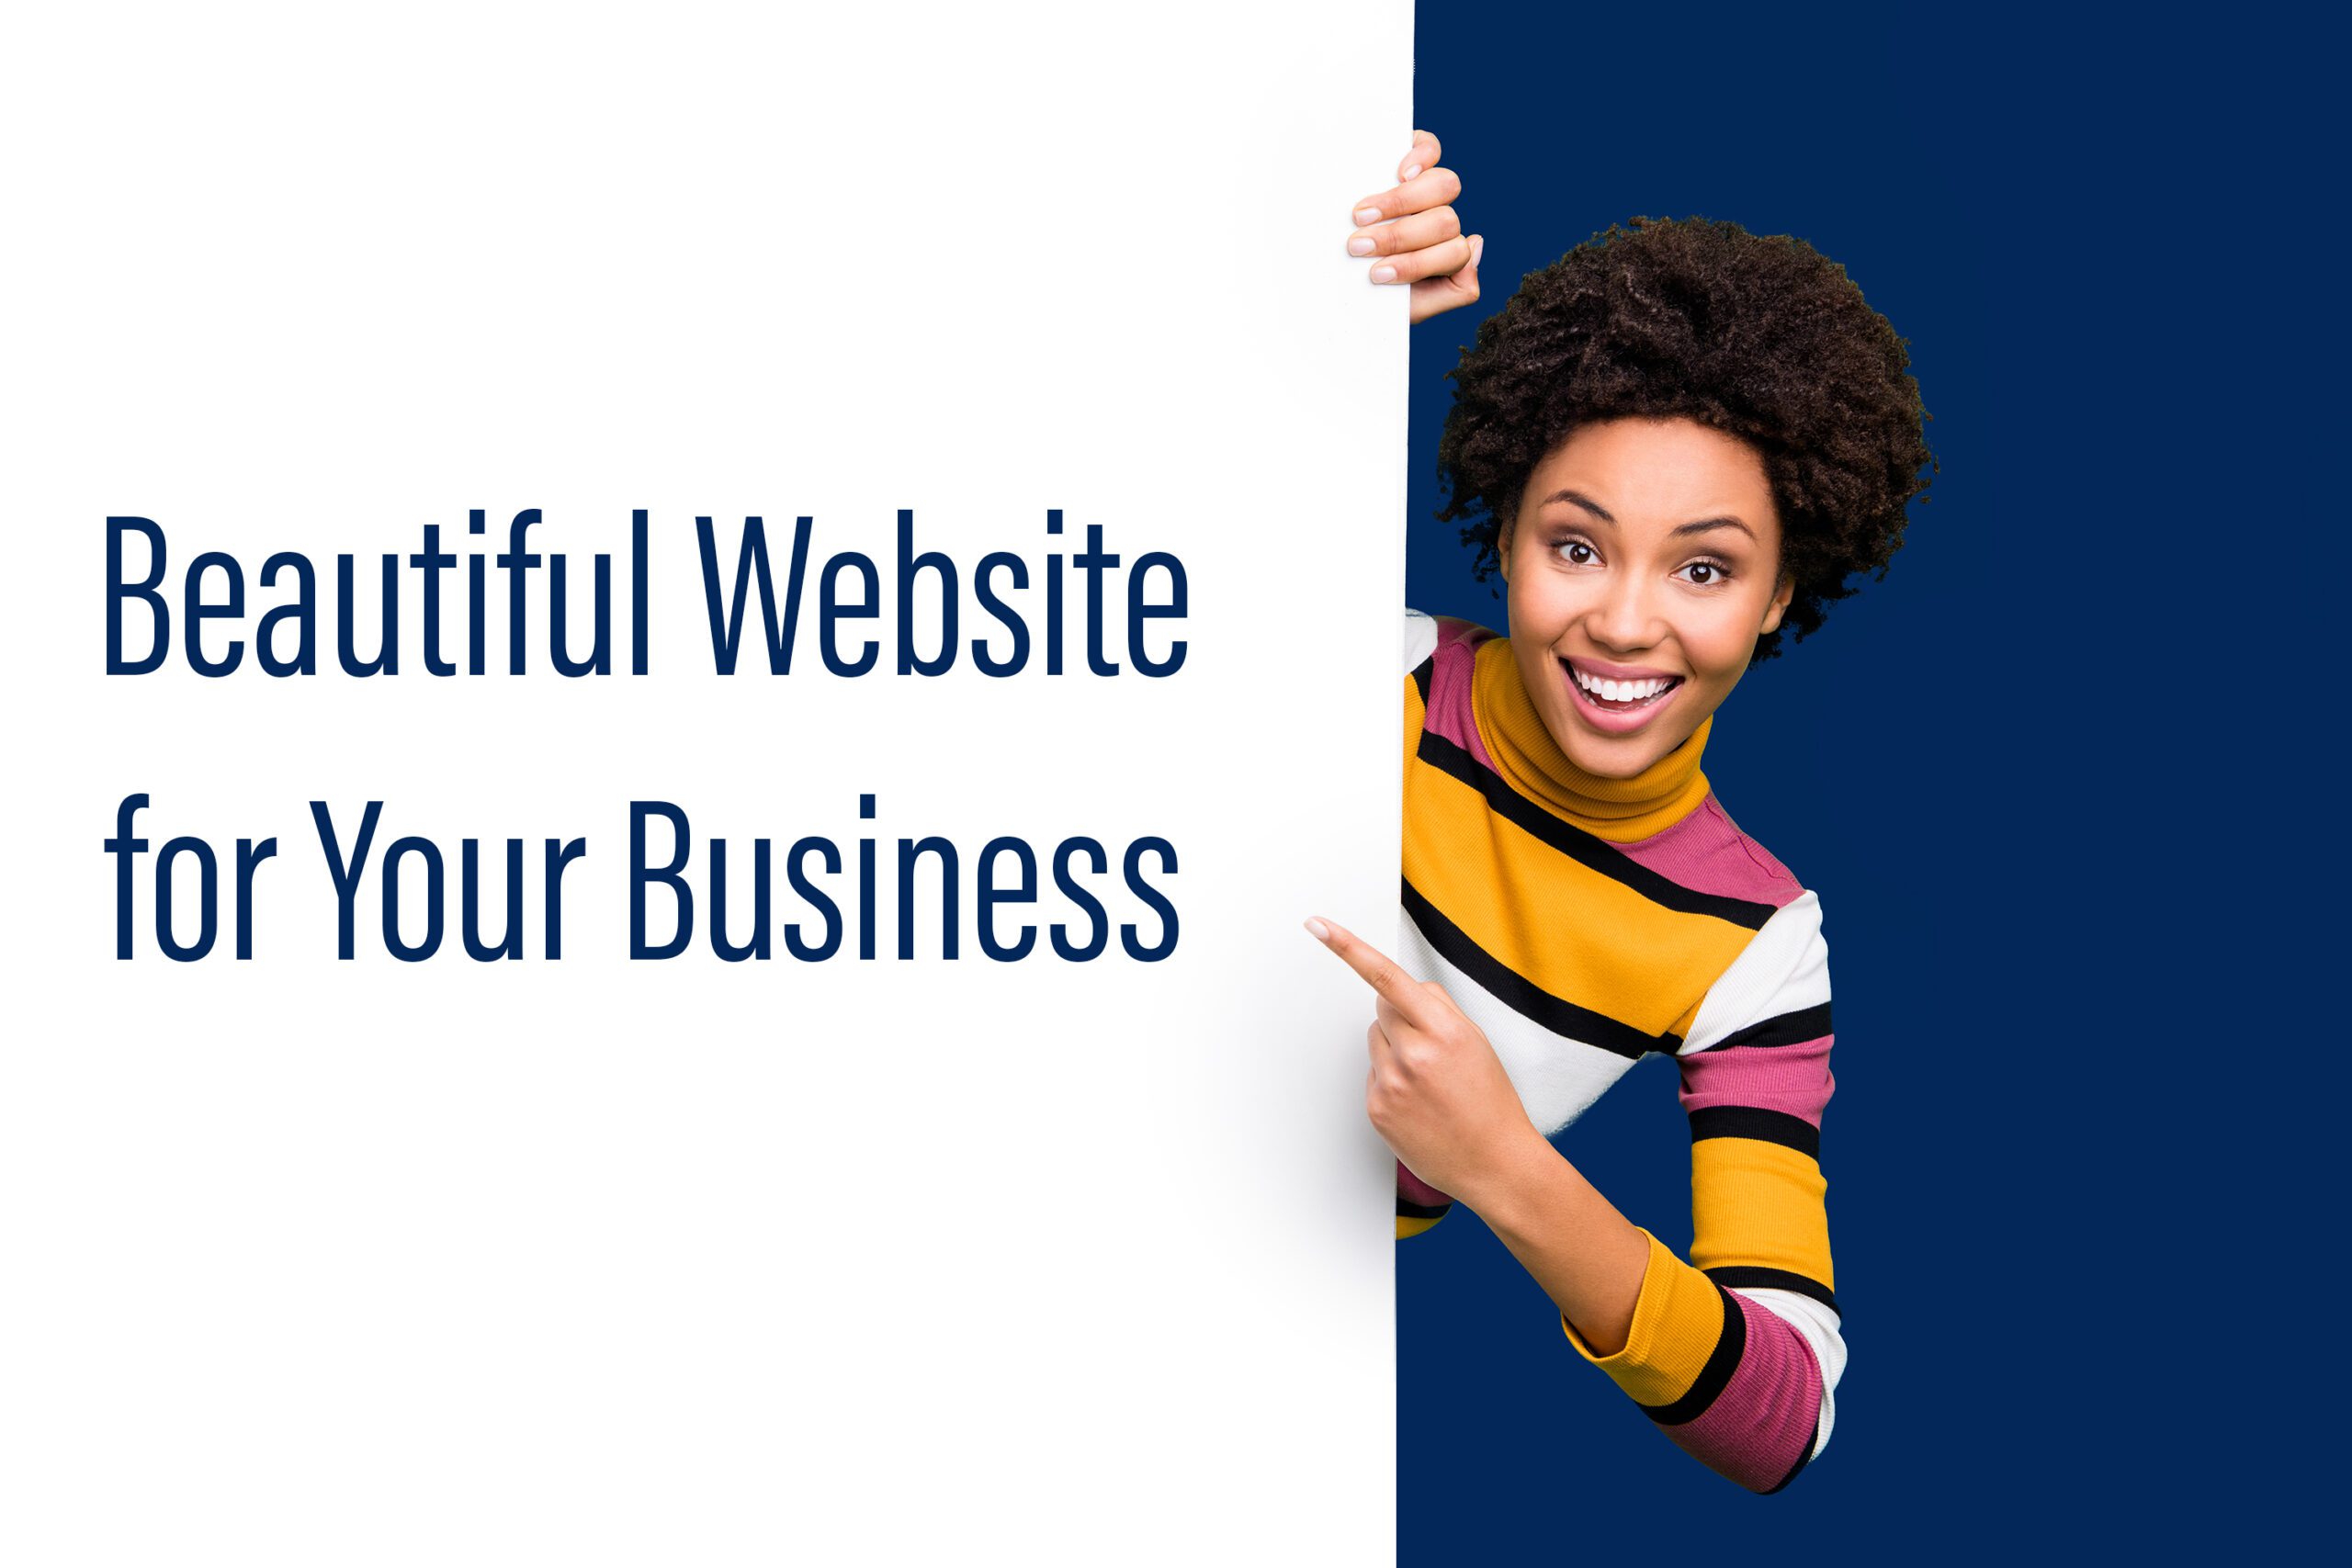 Girl pointing to sign reading "Beautiful website for your business" for web design in new york?